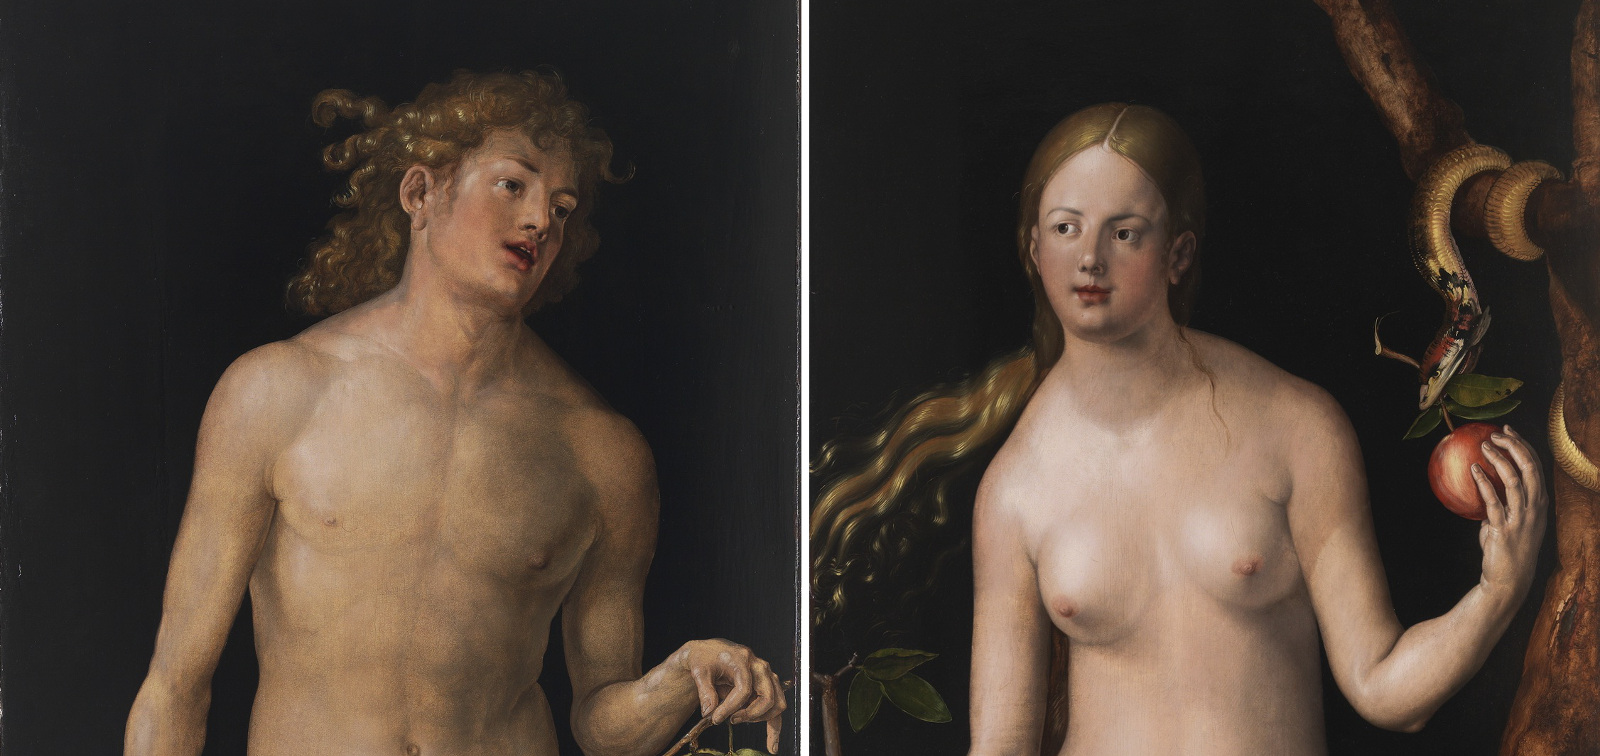 Special Display: Adam and Eve, by Dürer, following their restoration